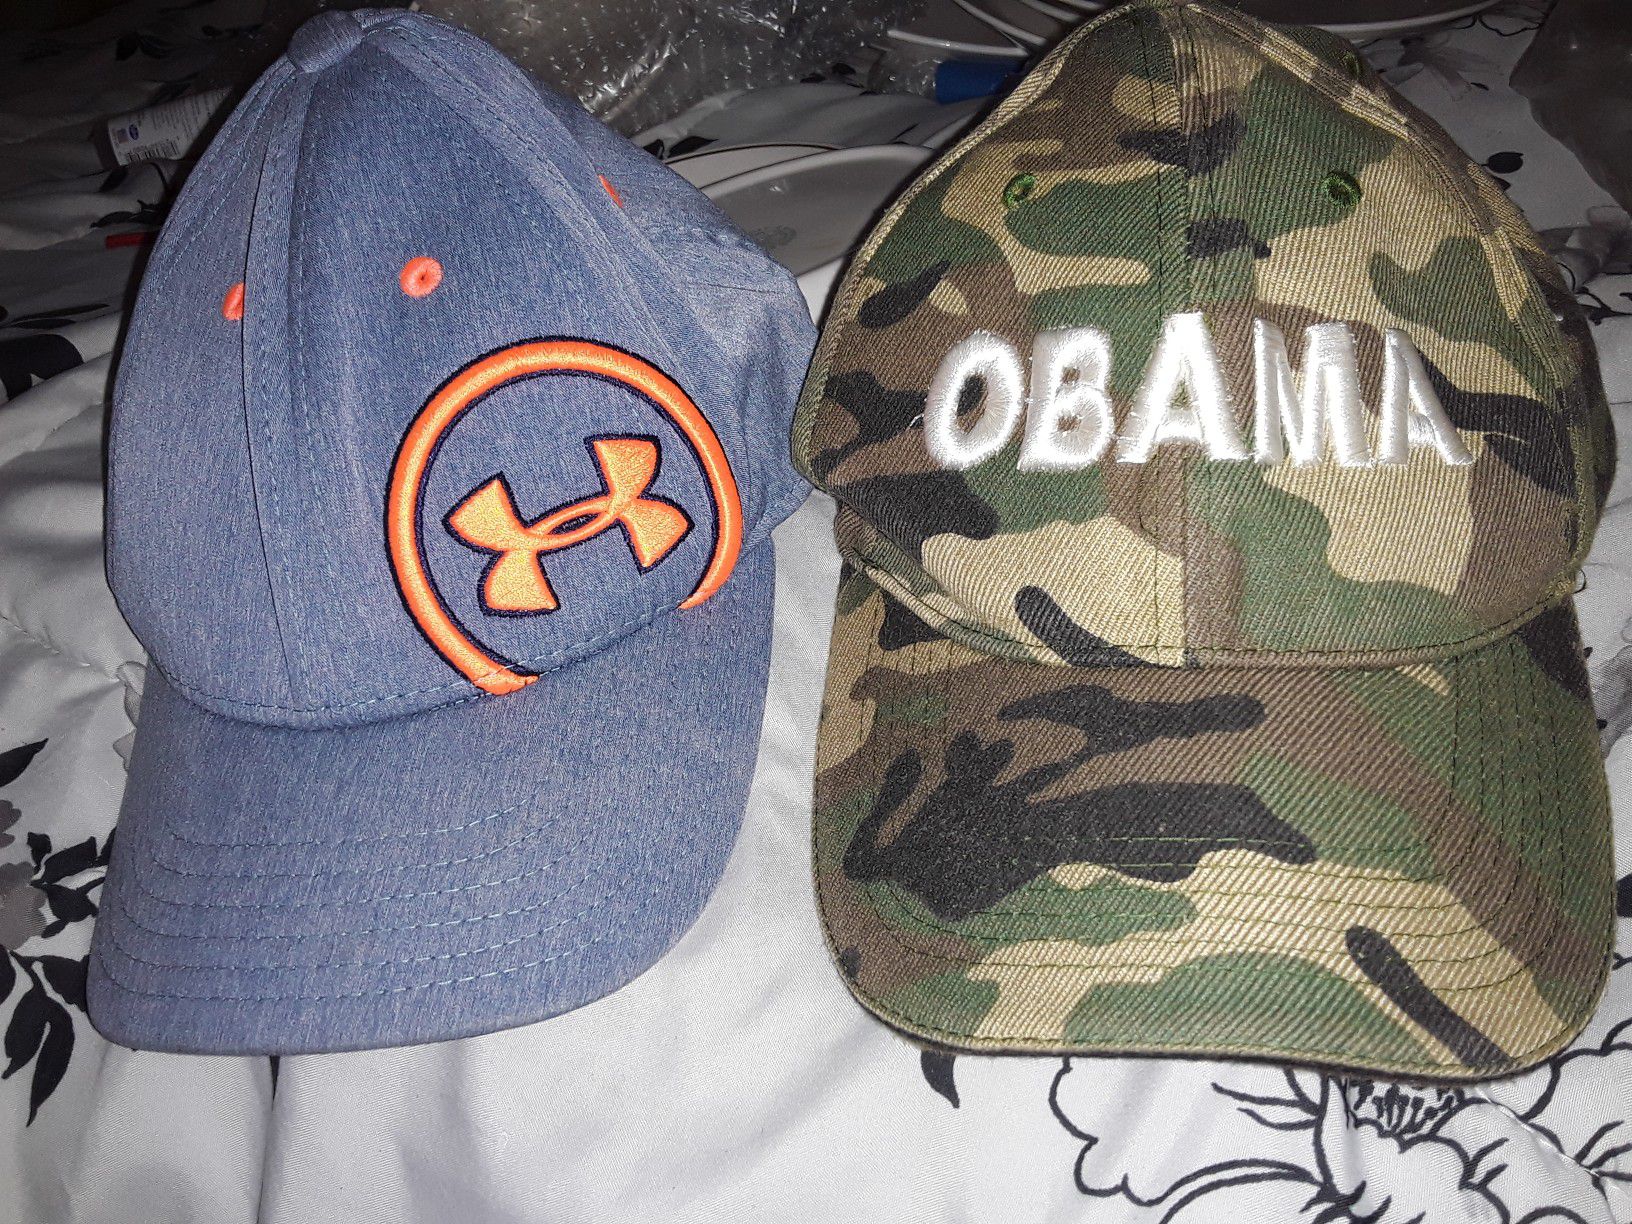 Under Armour hat and Barack Obama hat